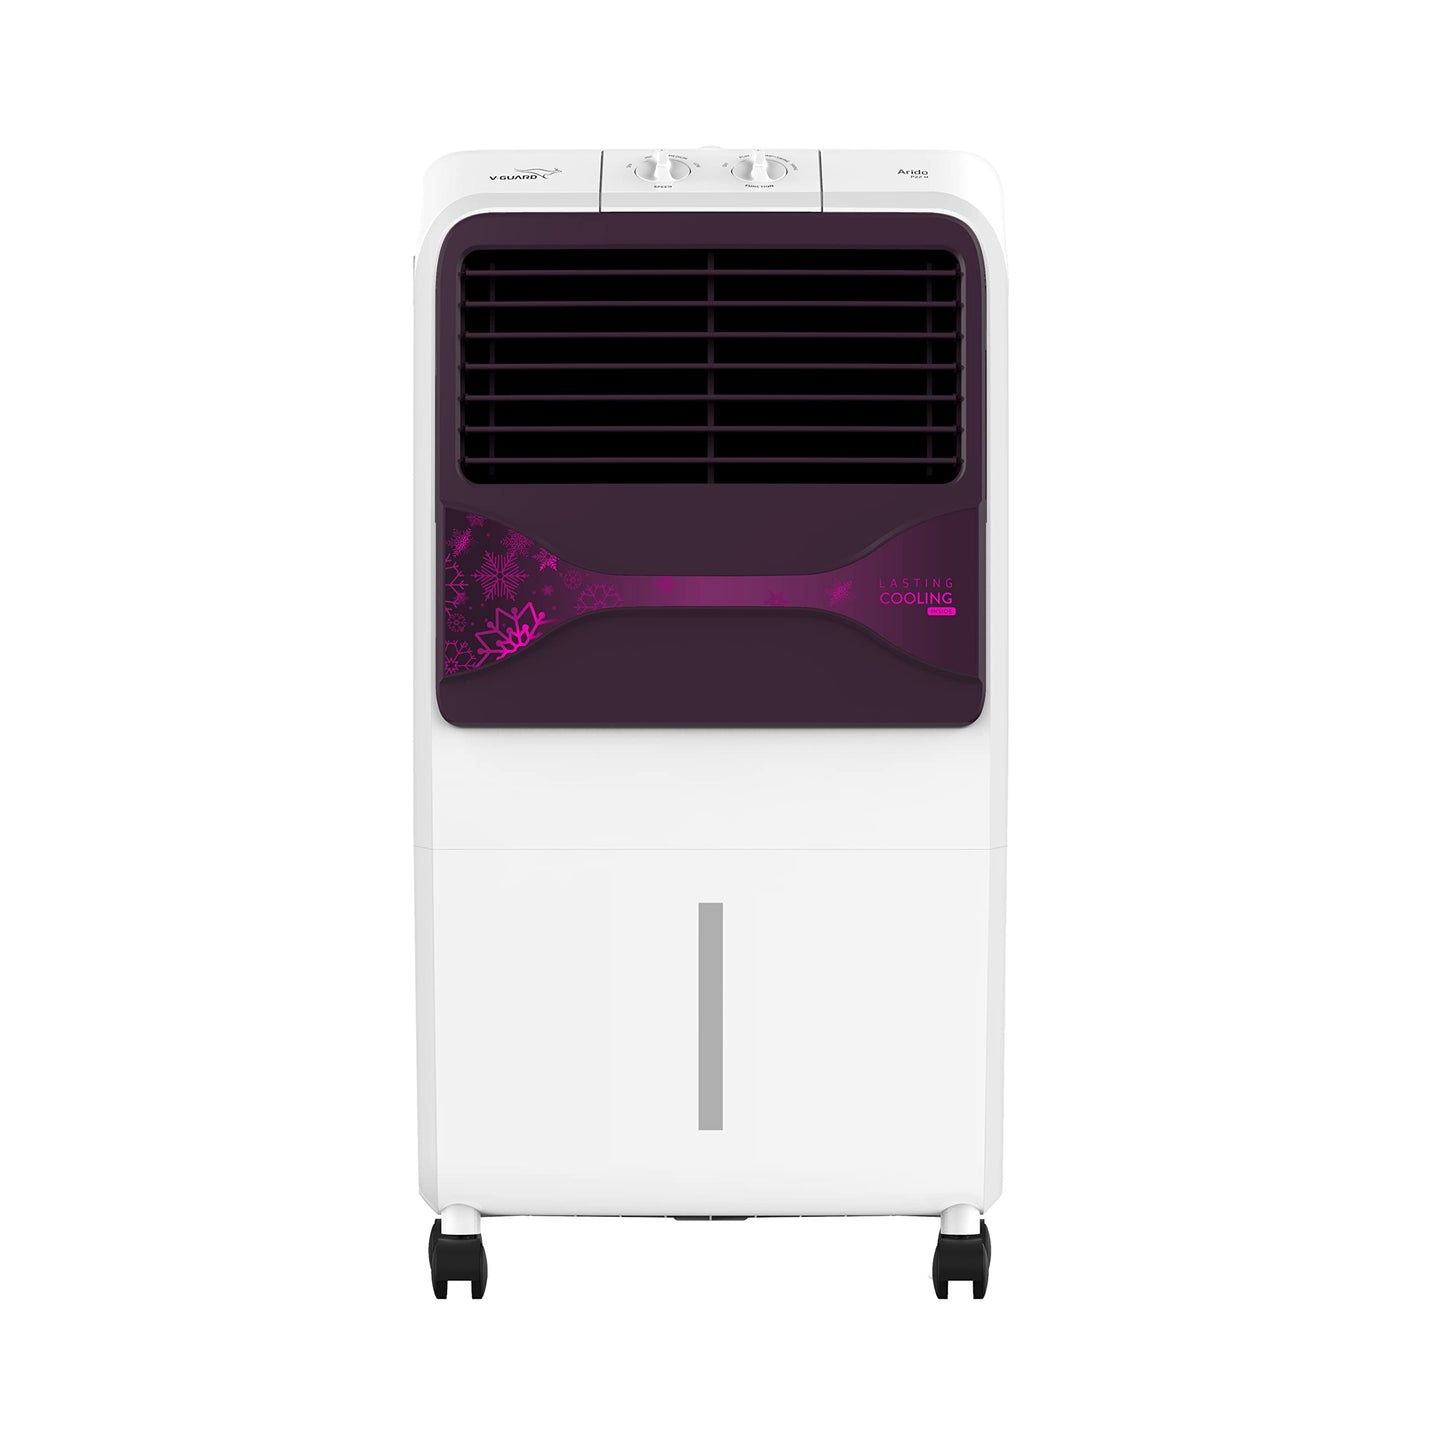 Arido P22 H Air cooler 22L, Air Delivery -1100 m3/h